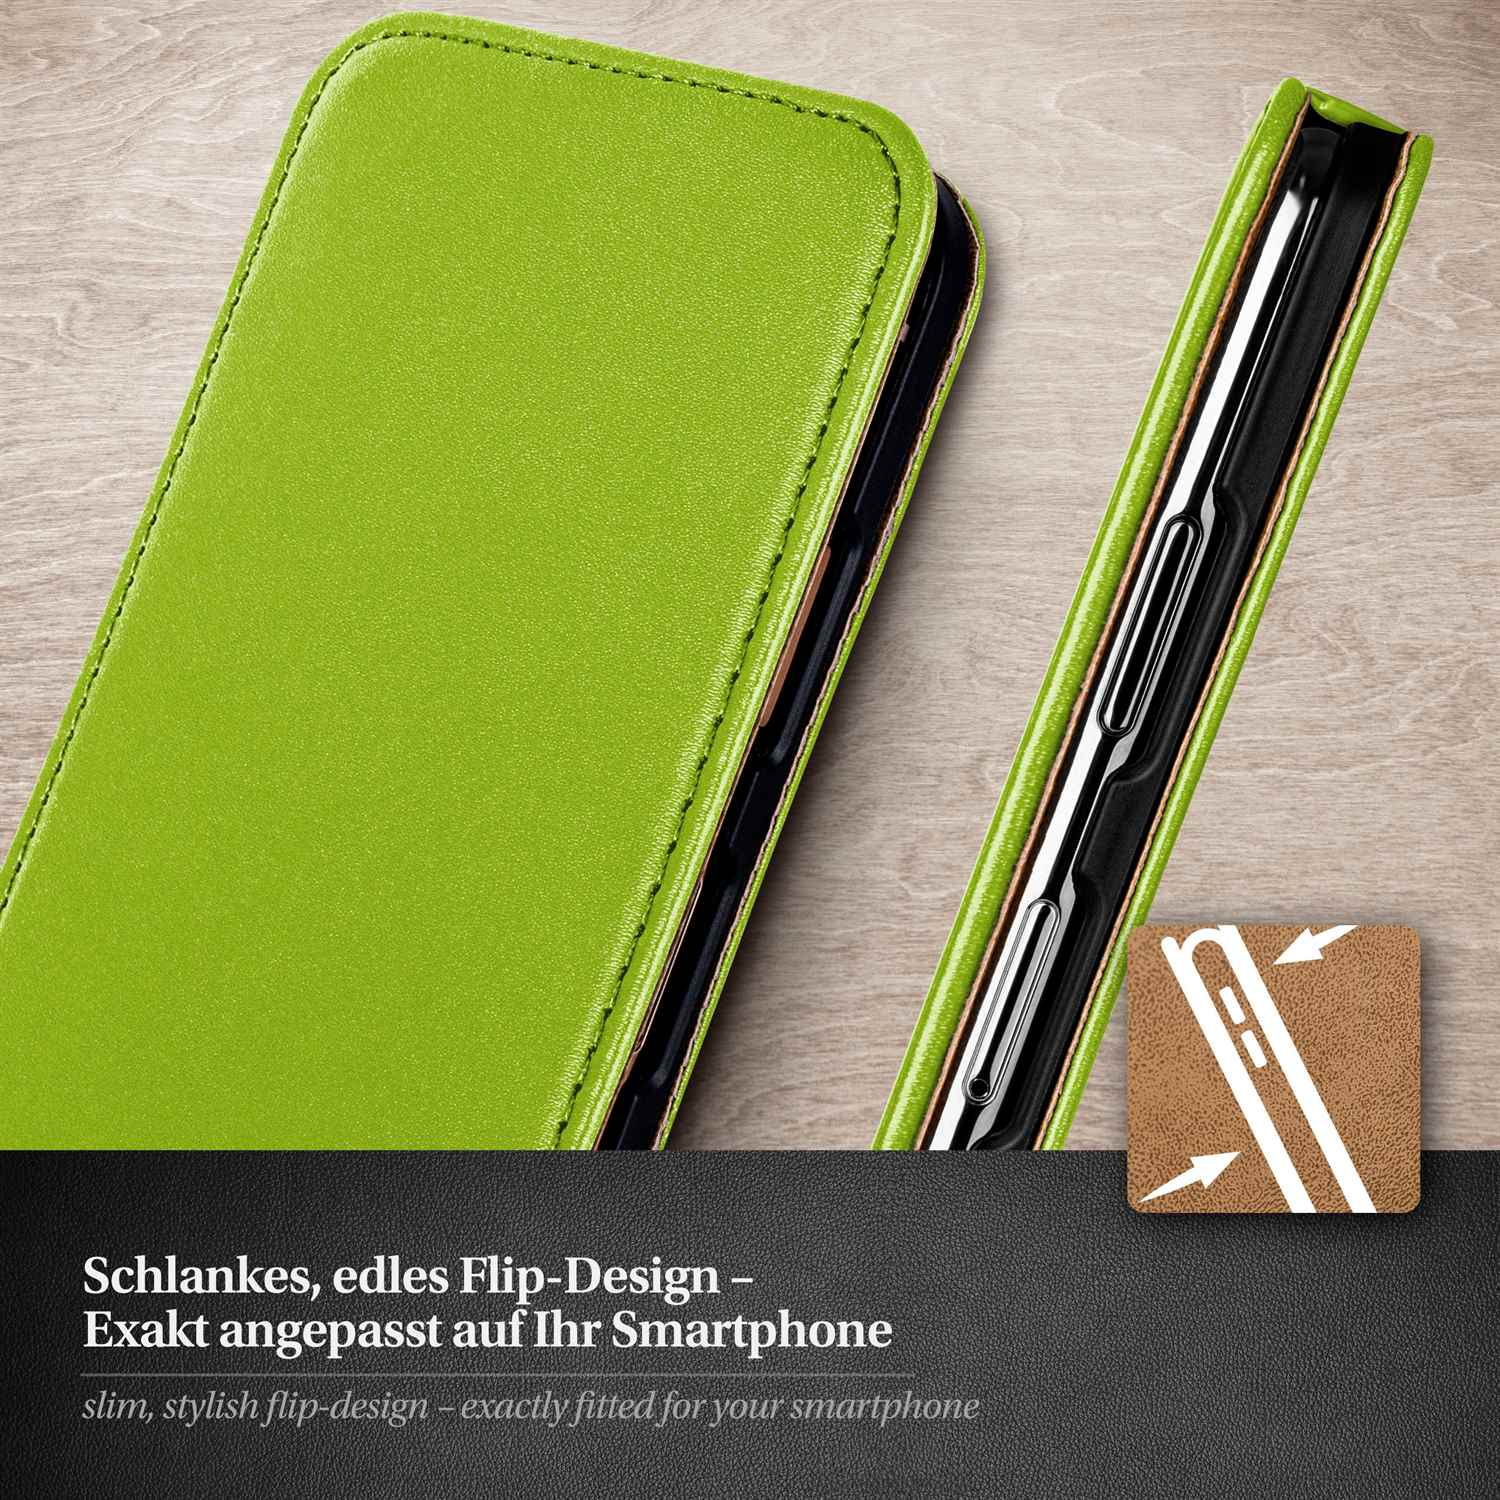 MOEX Flip Galaxy Case, Samsung, Flip Note Lime-Green 2, Cover